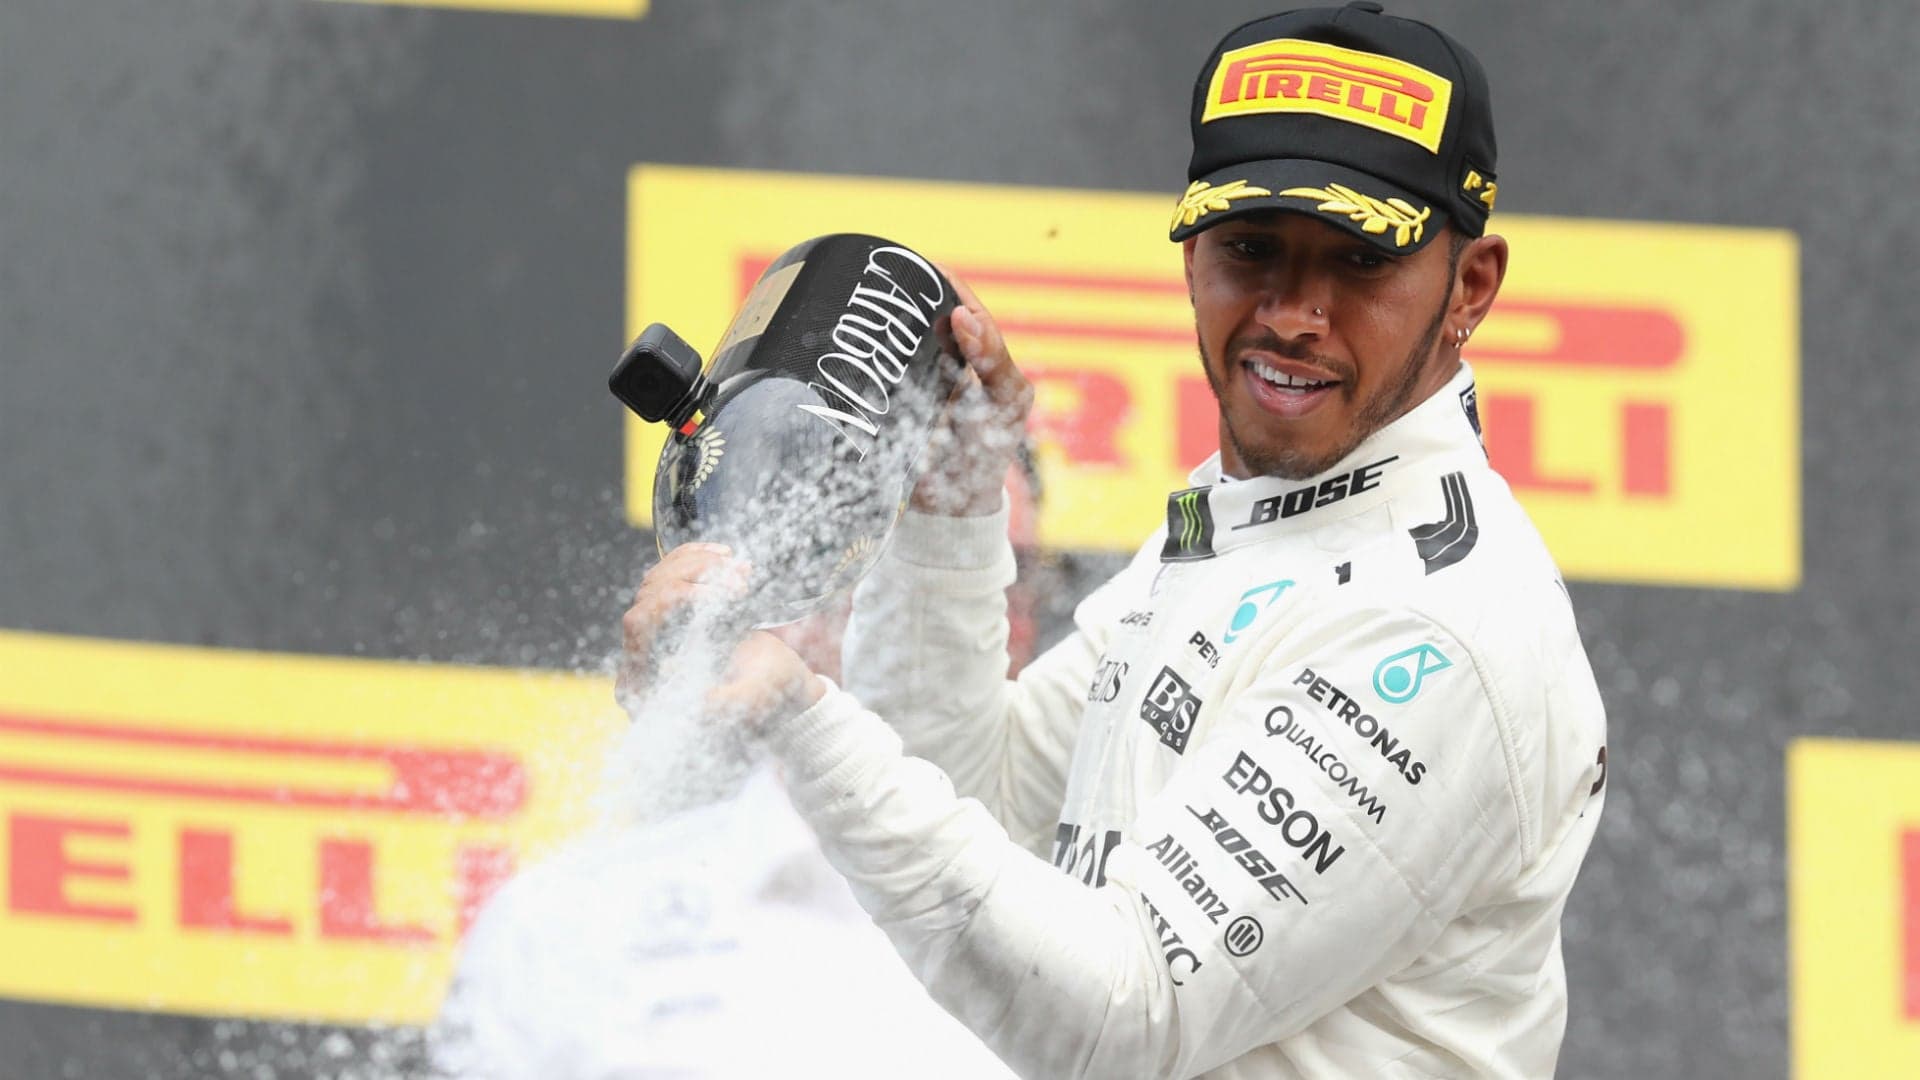 Lewis Hamilton Expects to Re-Sign with Mercedes